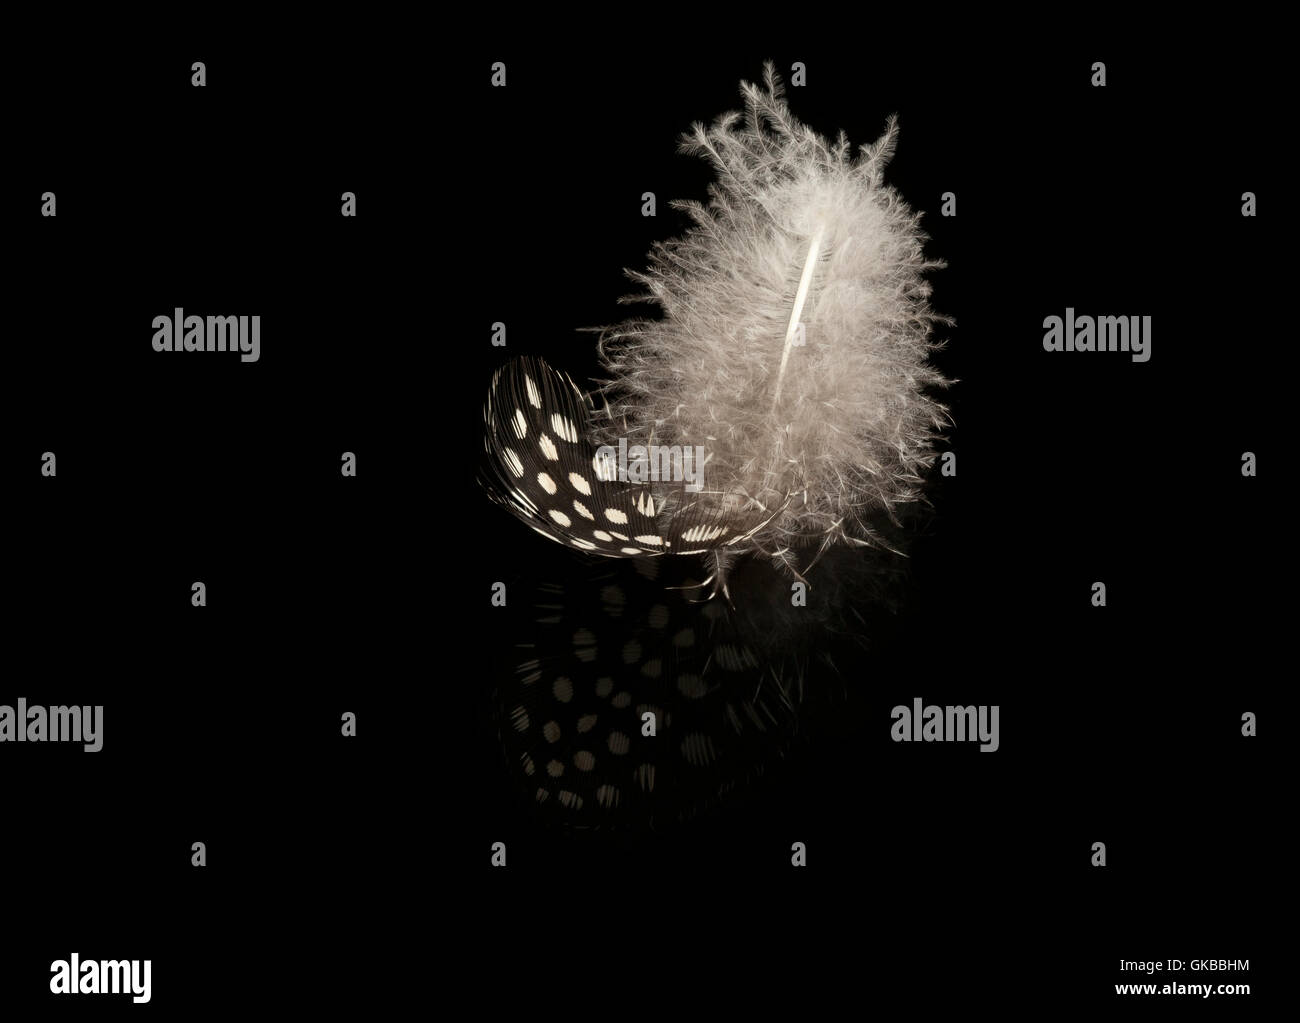 A black and white spotted feather of a  Guinea fowl resting on a black reflective background Stock Photo